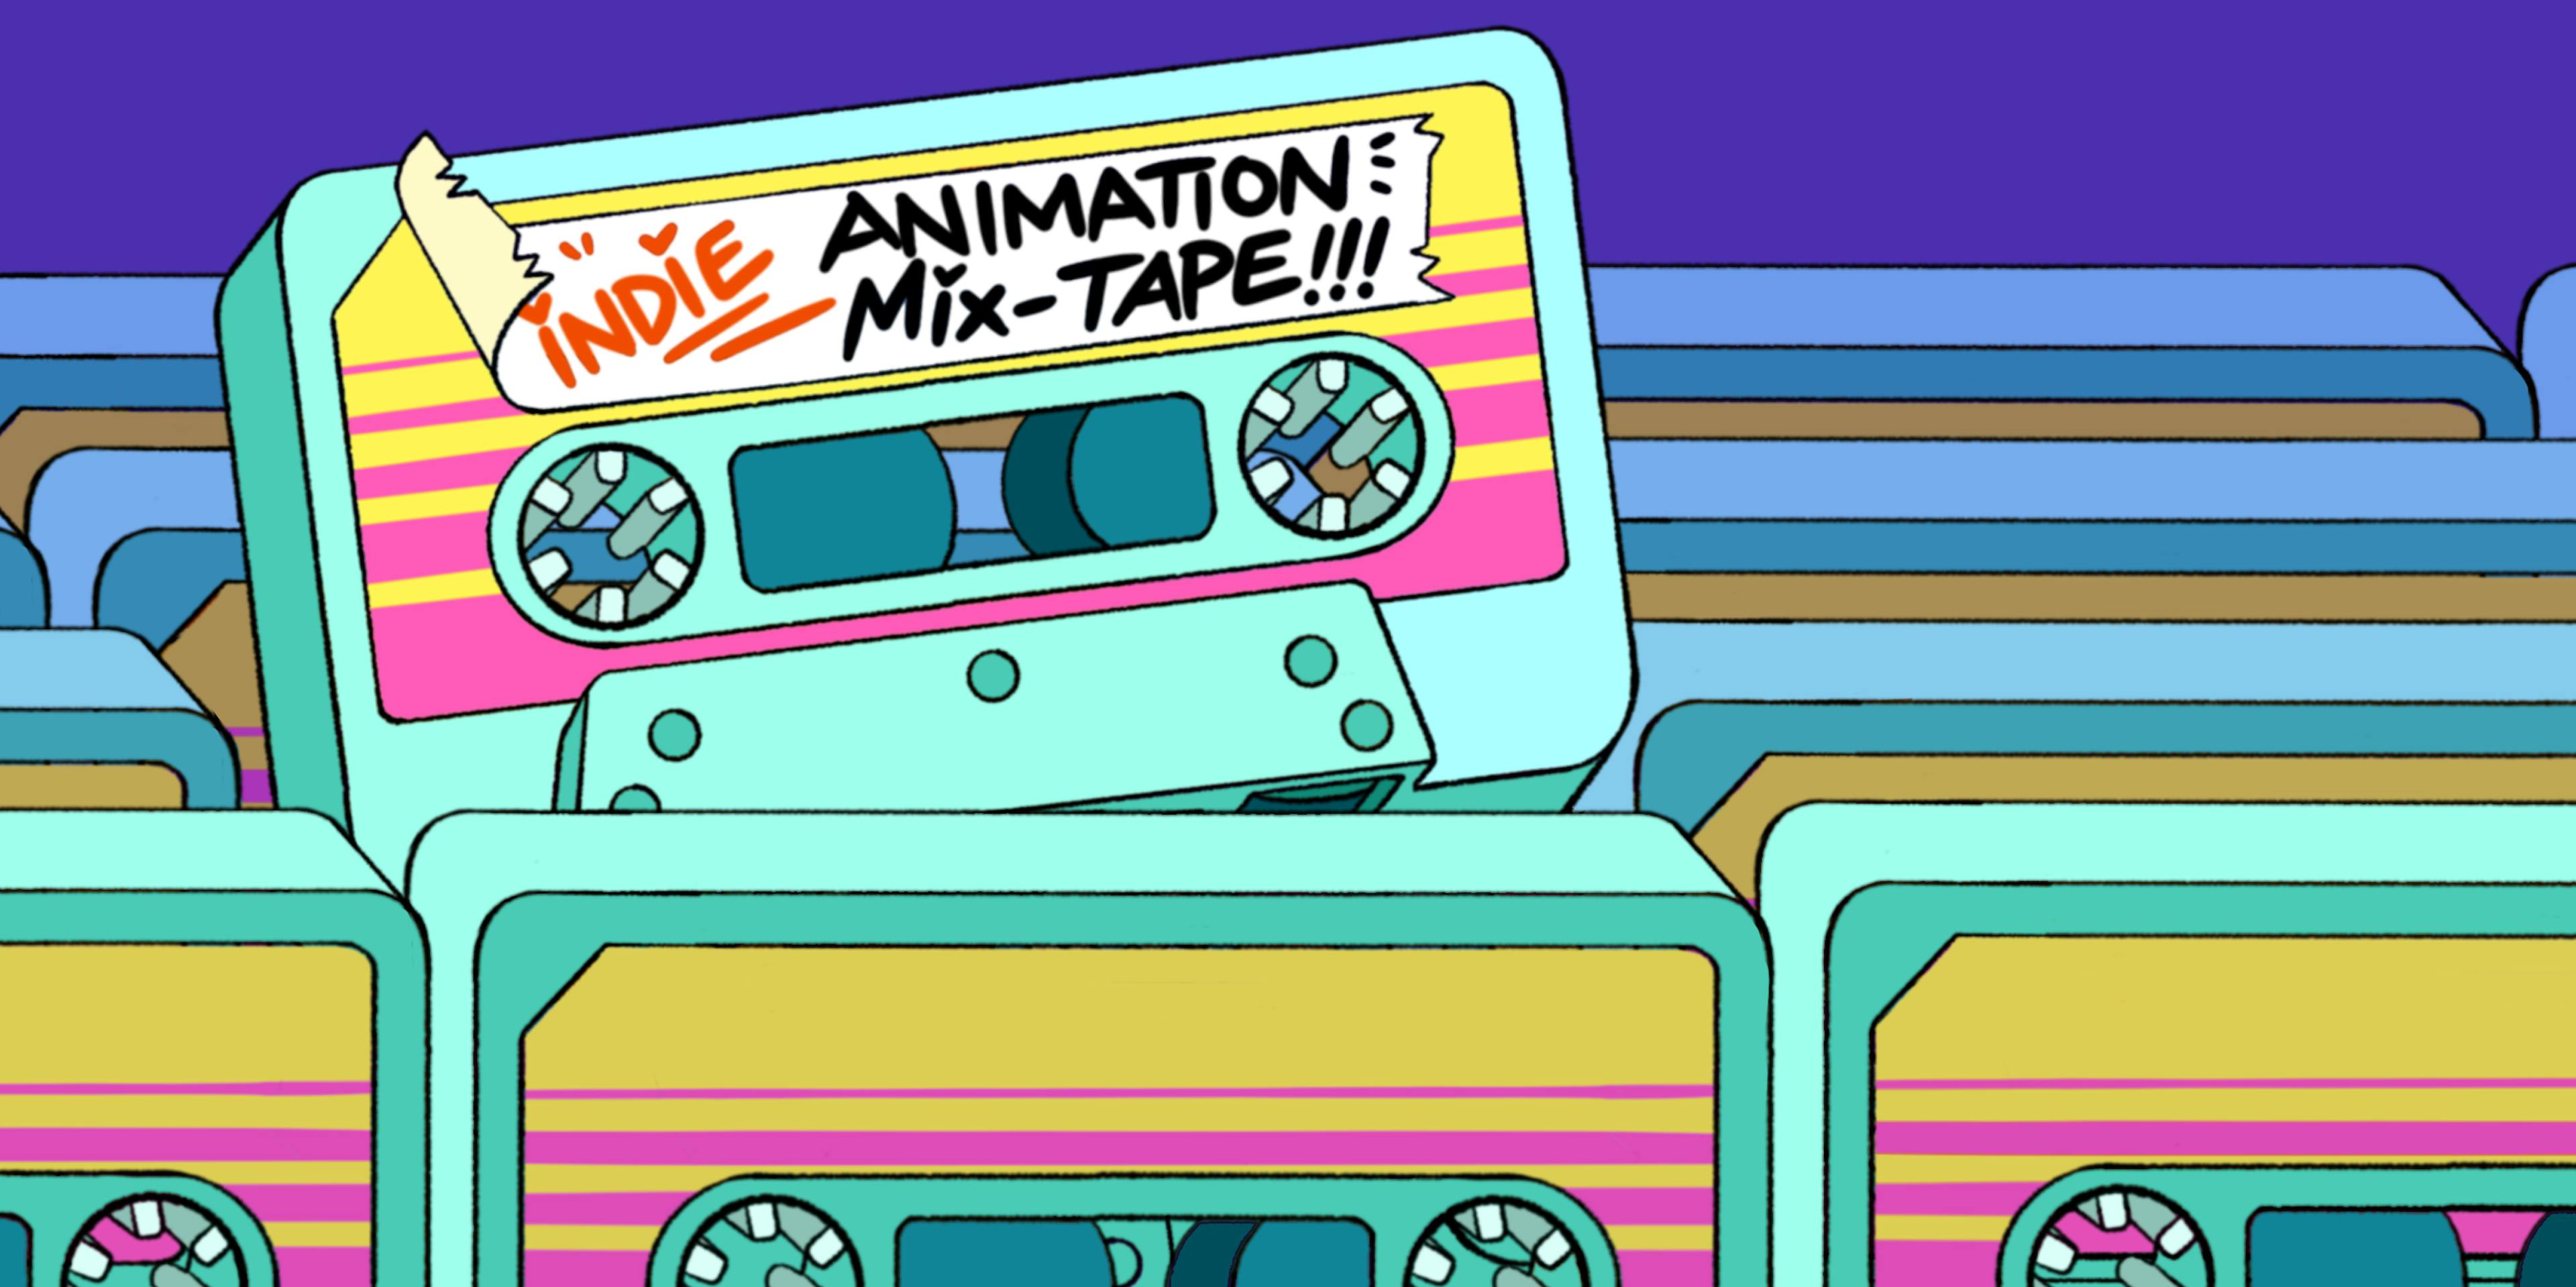 A tape labeled 'Indie Animation Mix-Tape!!!' pops out of a stack of tapes.